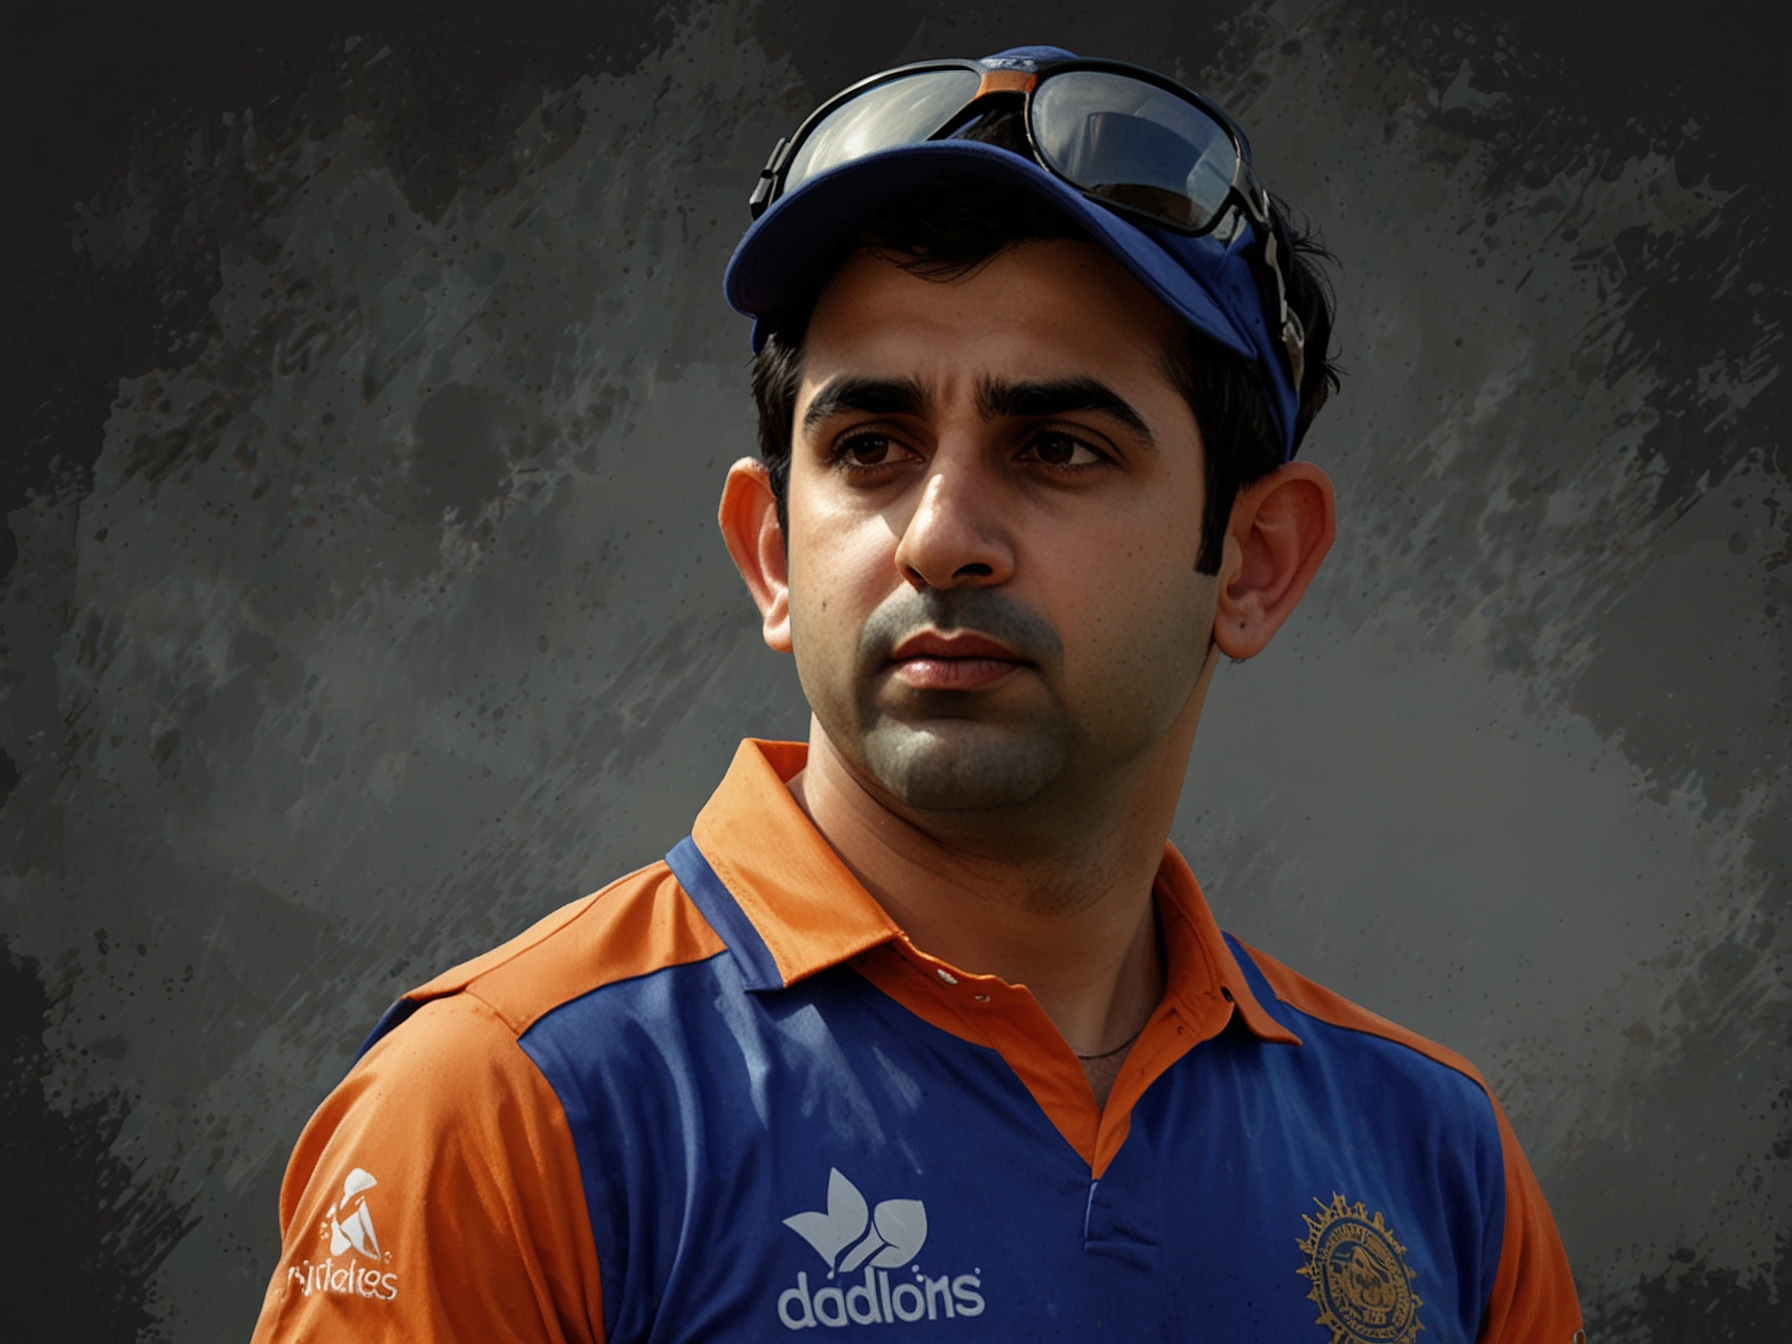 Gautam Gambhir during an IPL match, reflecting his leadership and mentoring skills on the field. His tactical brilliance and unwavering discipline will benefit Team India as he steps into the head coach role.